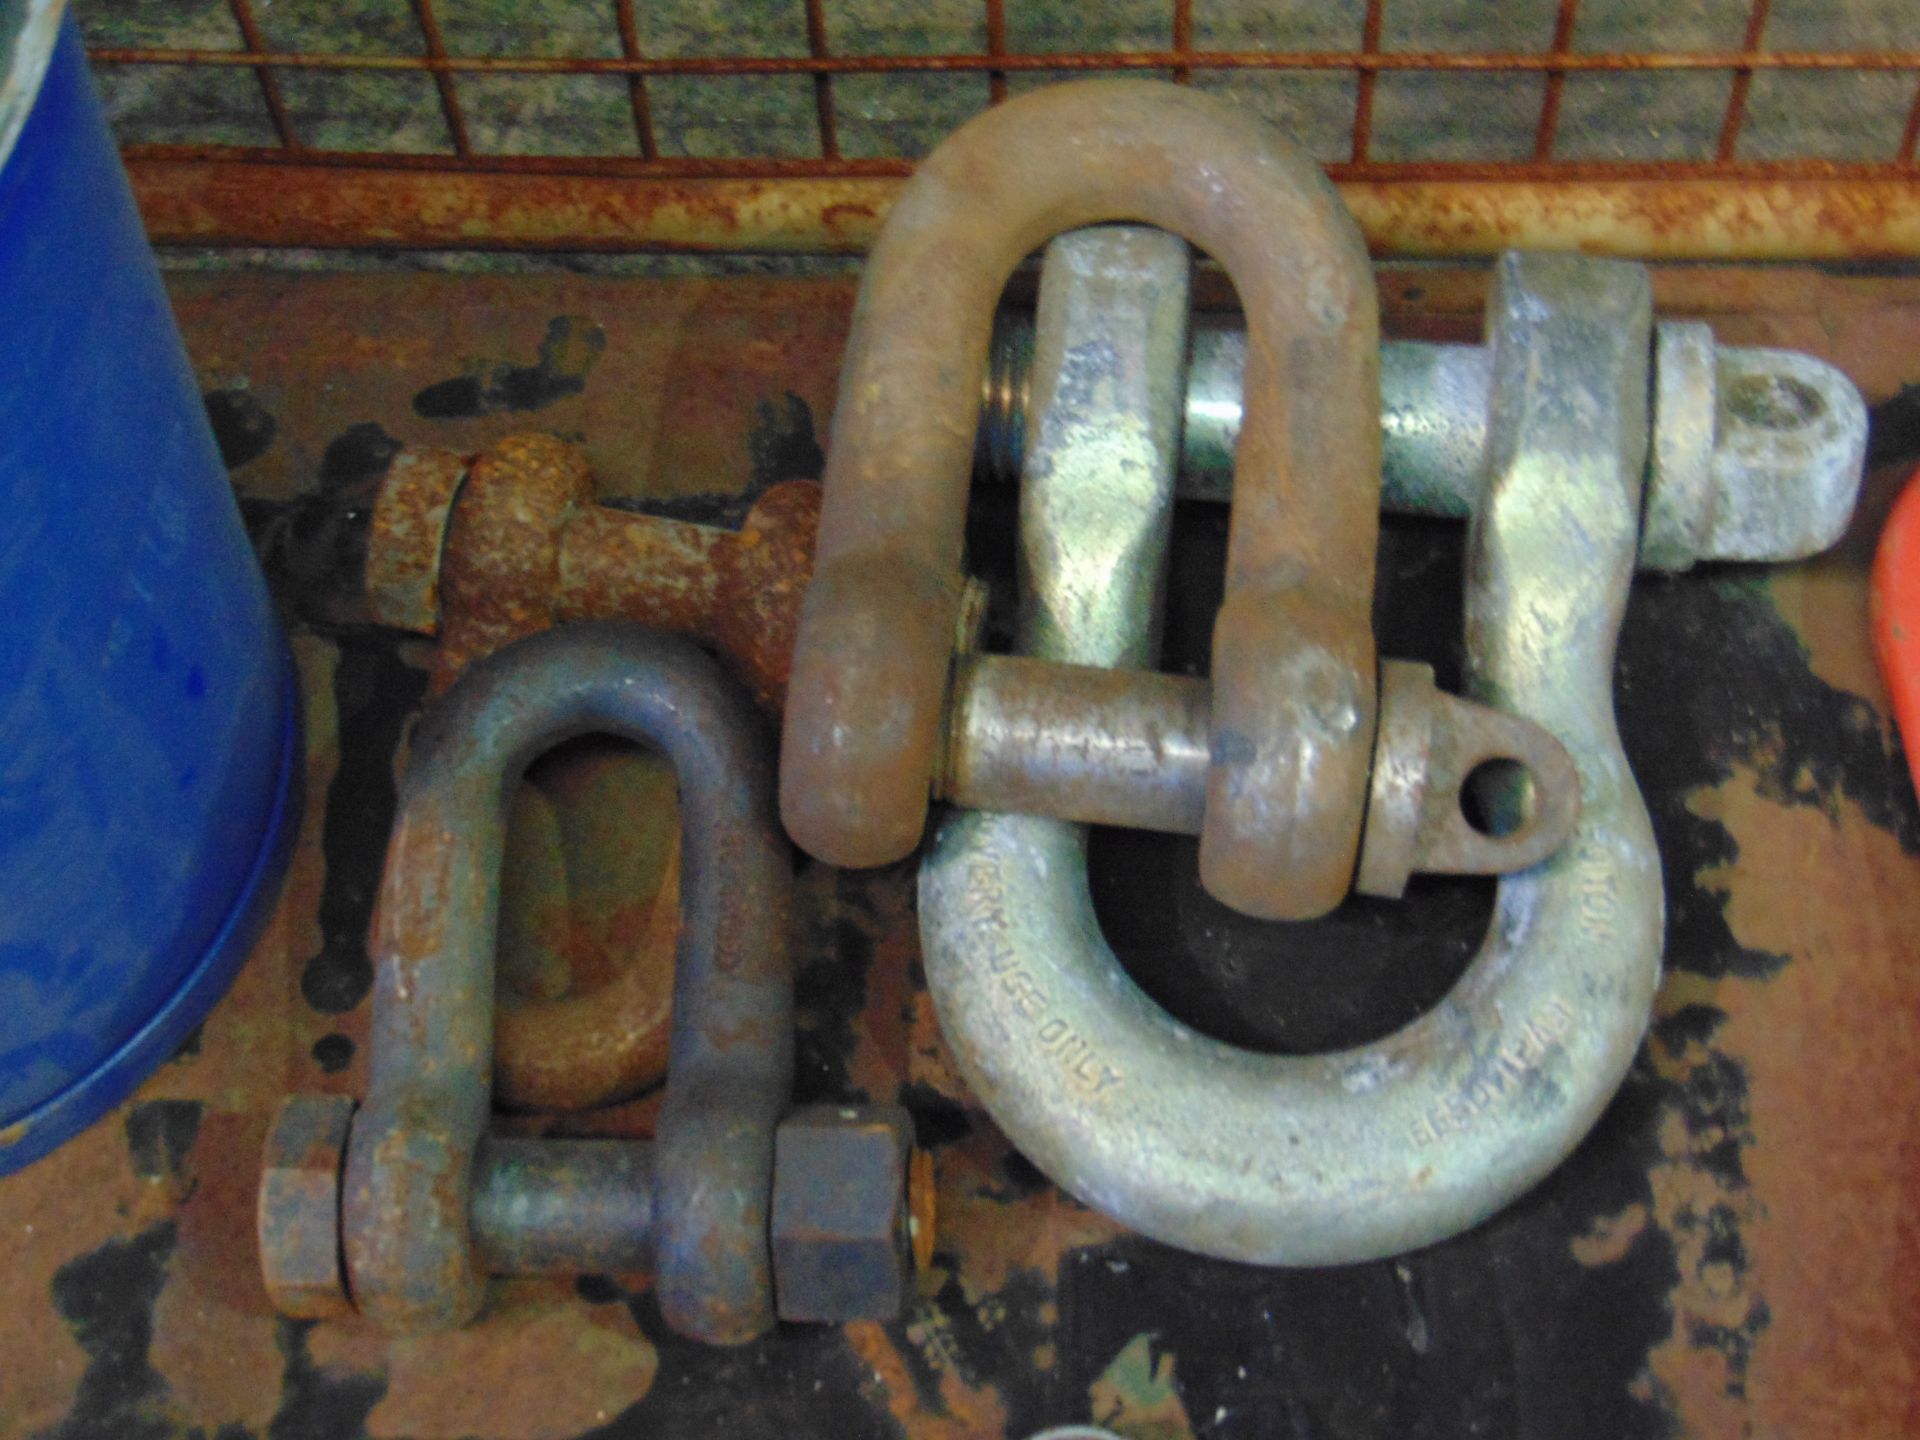 1X STILLAGE OF RECOVERY EQUIPMENT TOOLS GREASE GUN ETC - Image 4 of 6